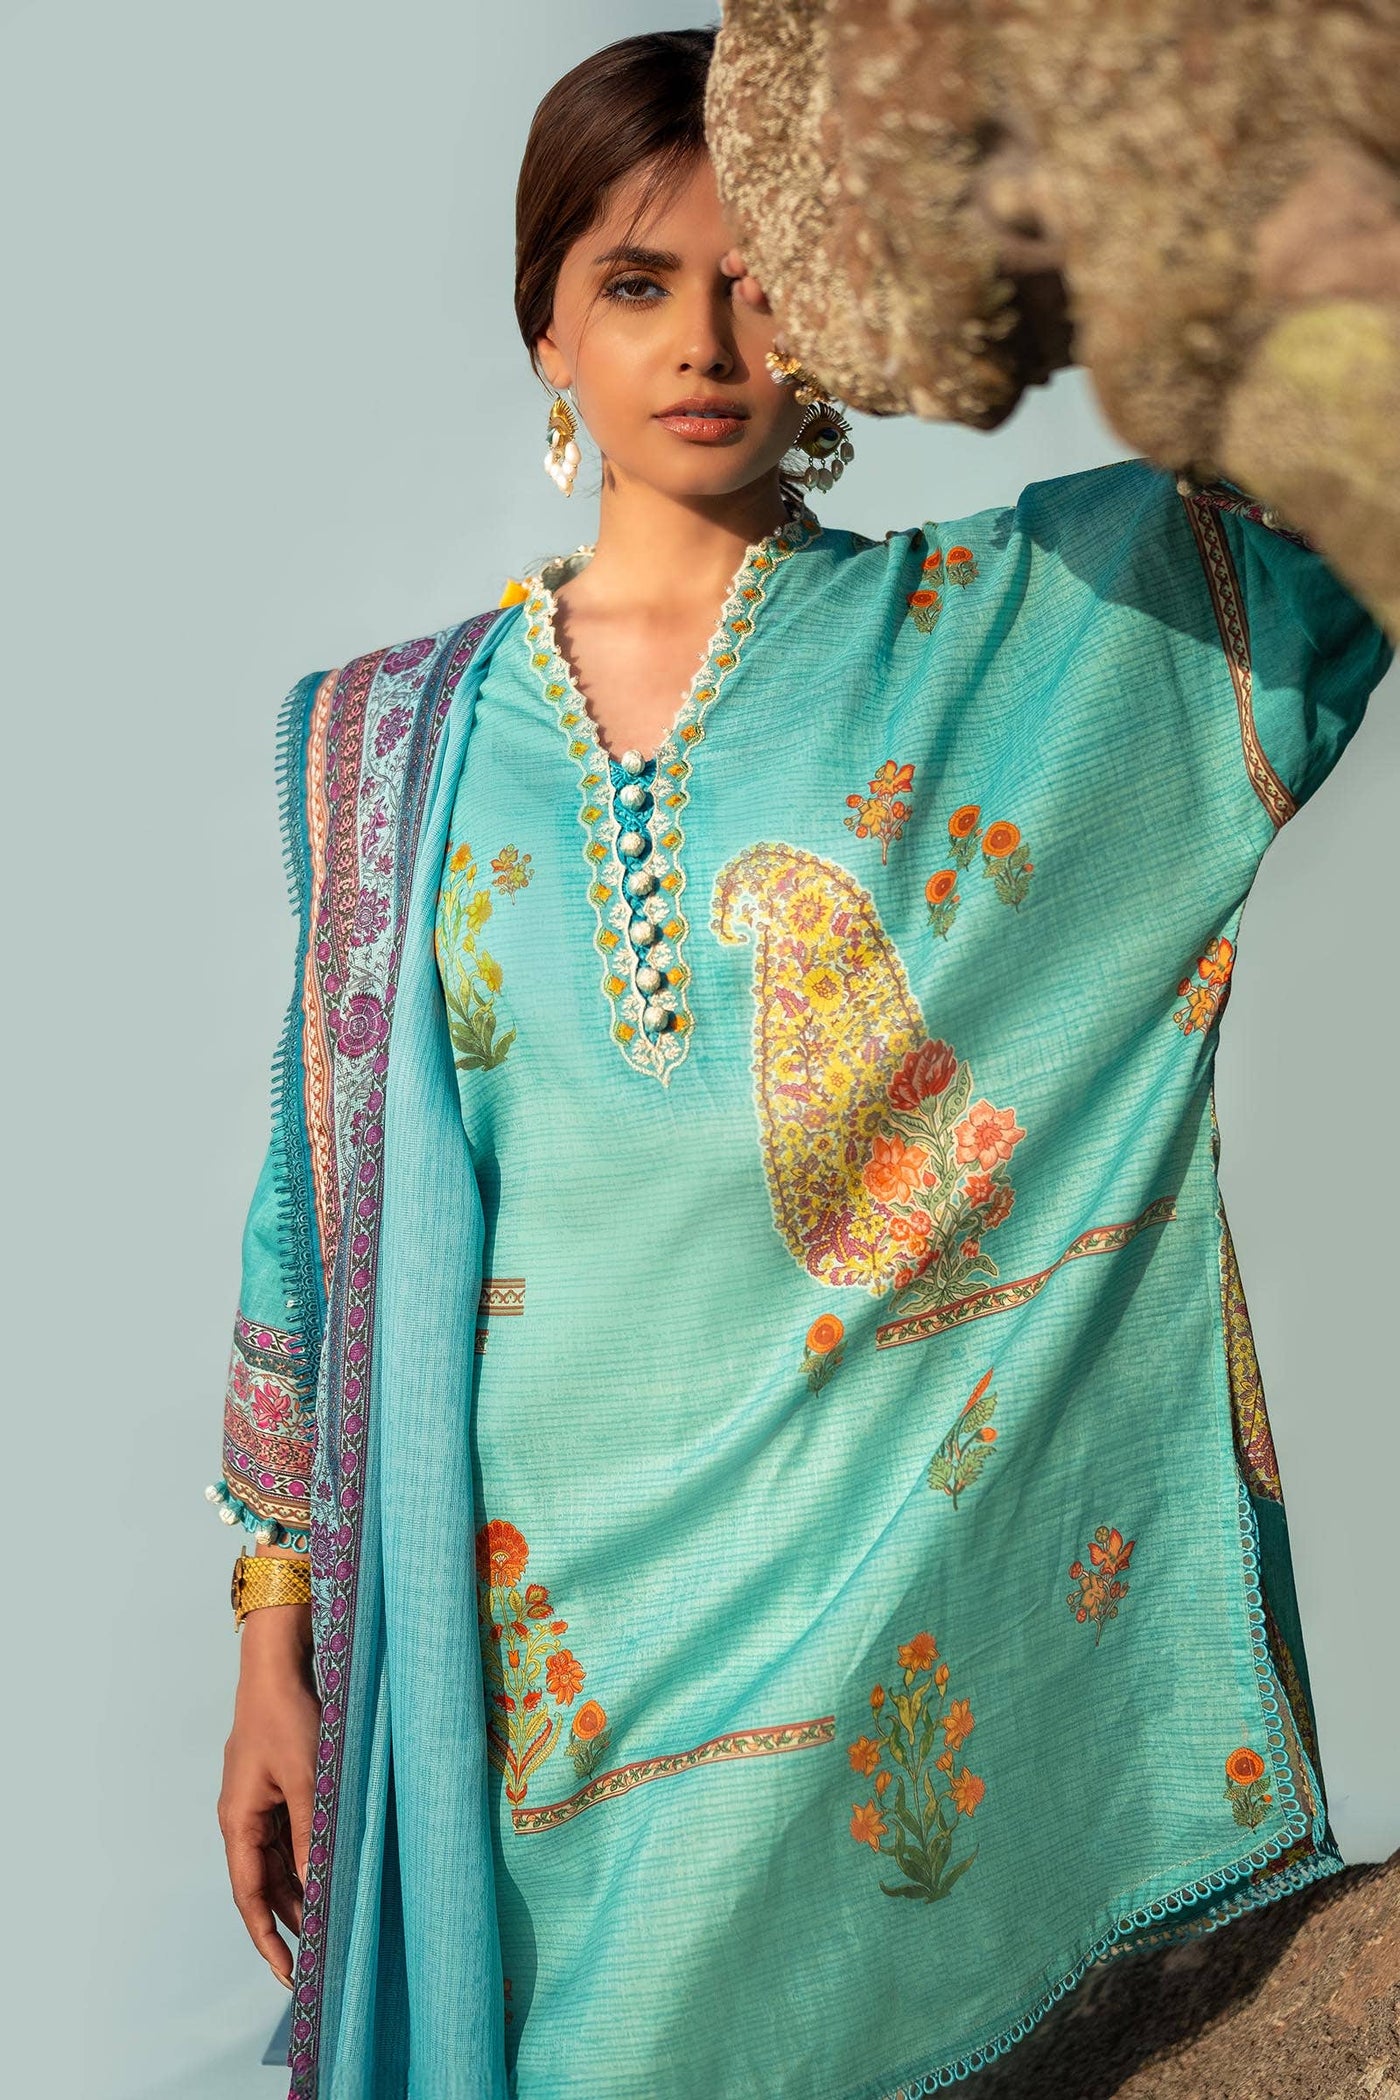 SANA SAFINAZ 2 Piece Unstitched Digital On Lawn Shirt with Rotary Printed Dupatta On Tennis Net - H241-022B-2BS